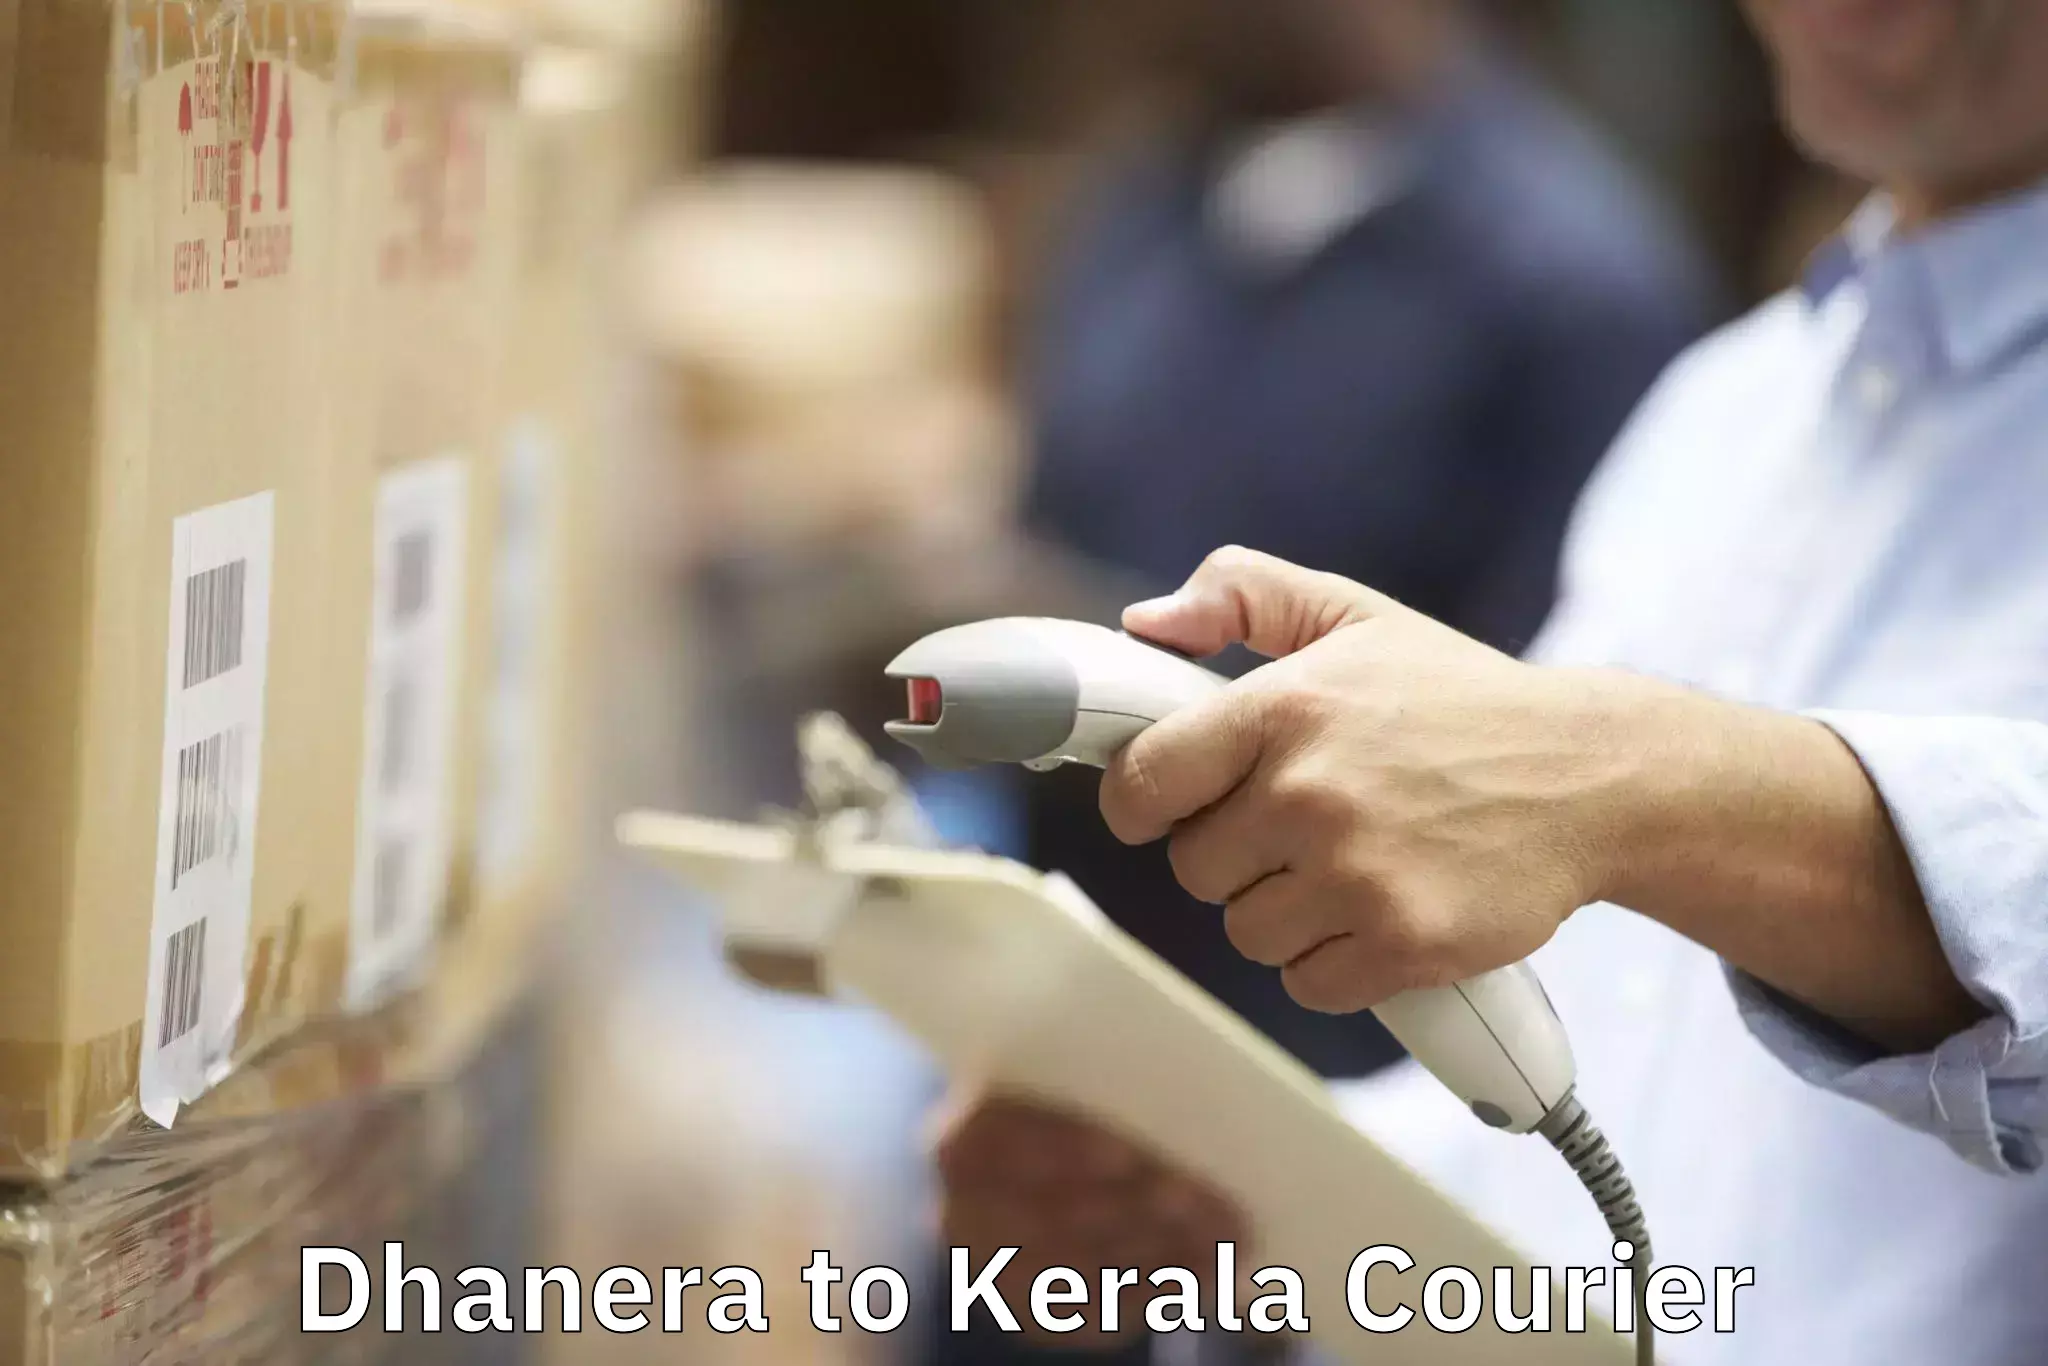 Professional packing and transport Dhanera to Kerala